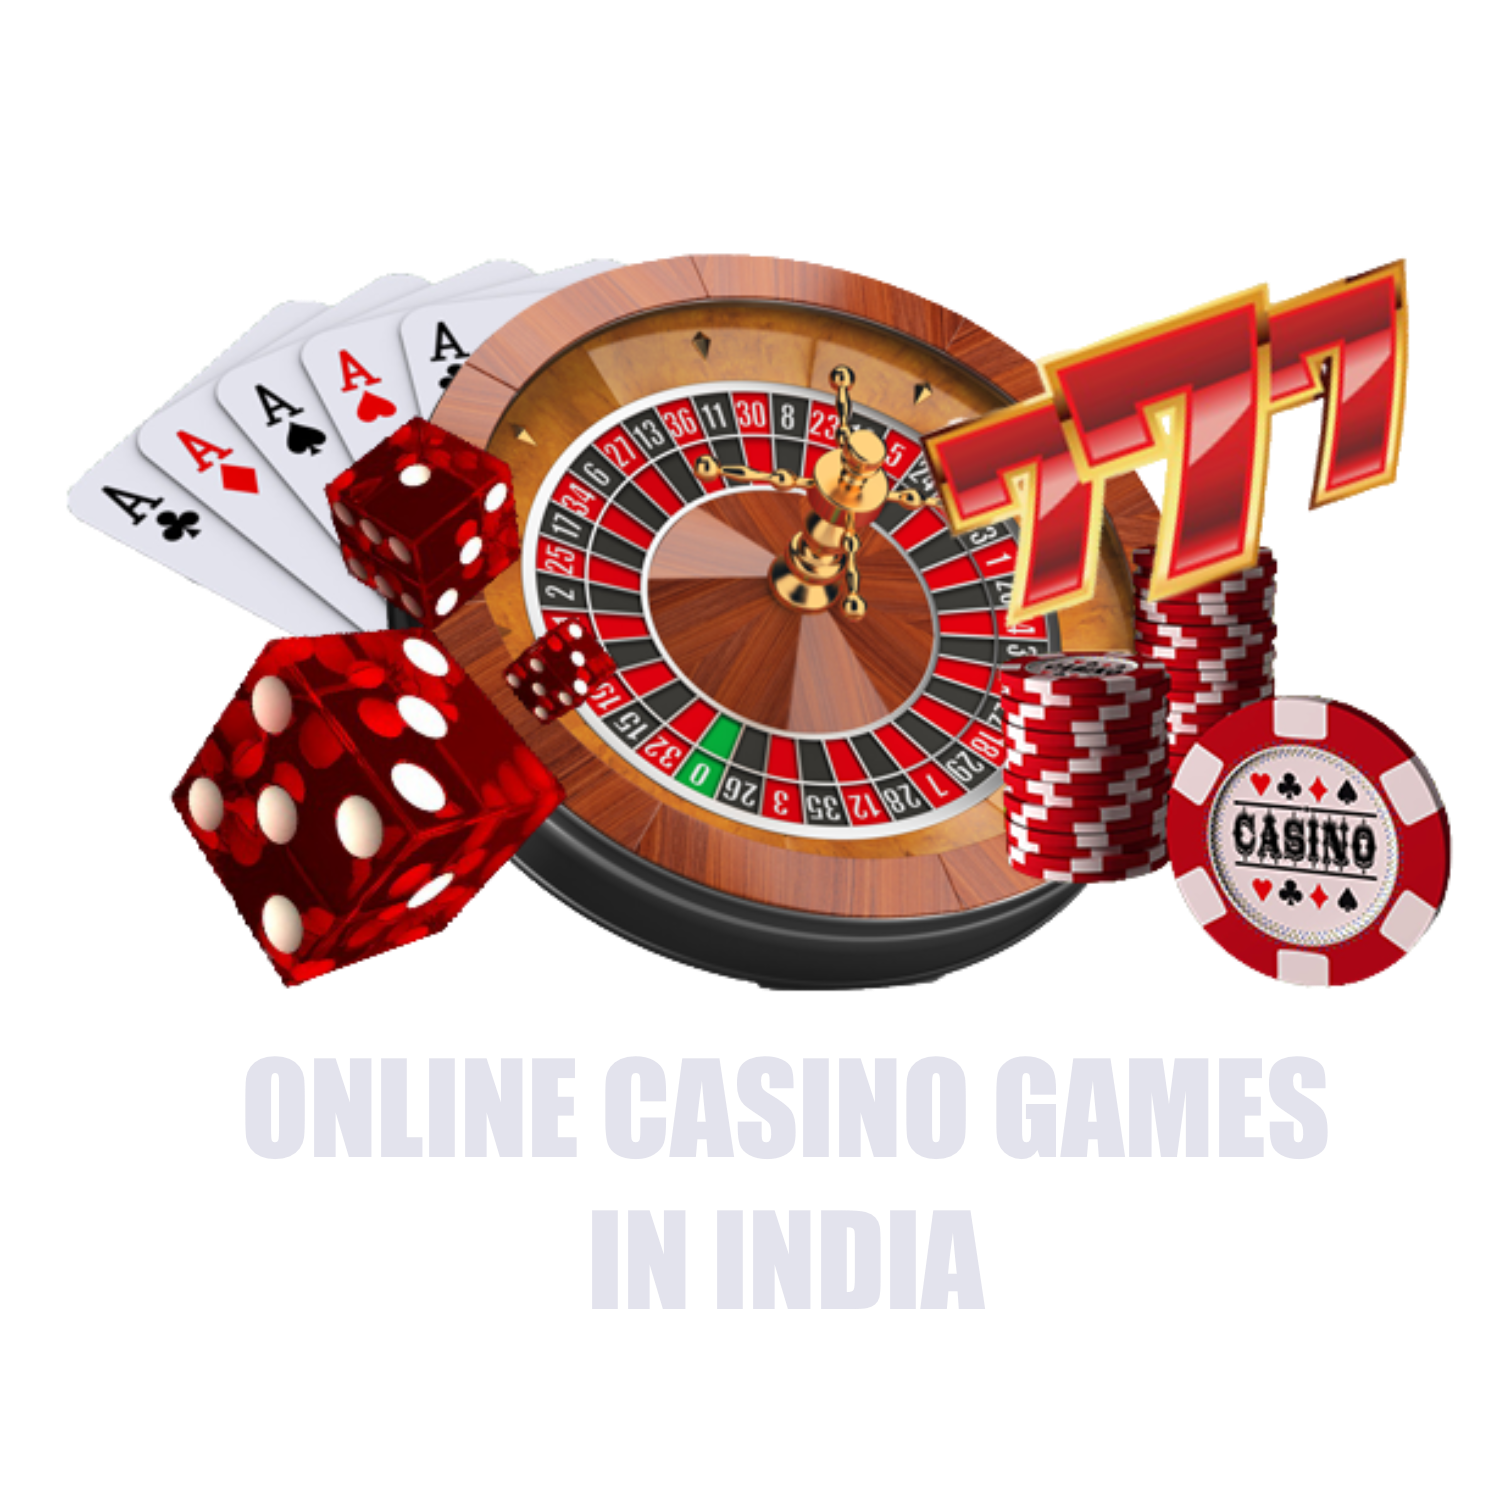 Sign up for an online casino and start playing the most esciting casino games in India.